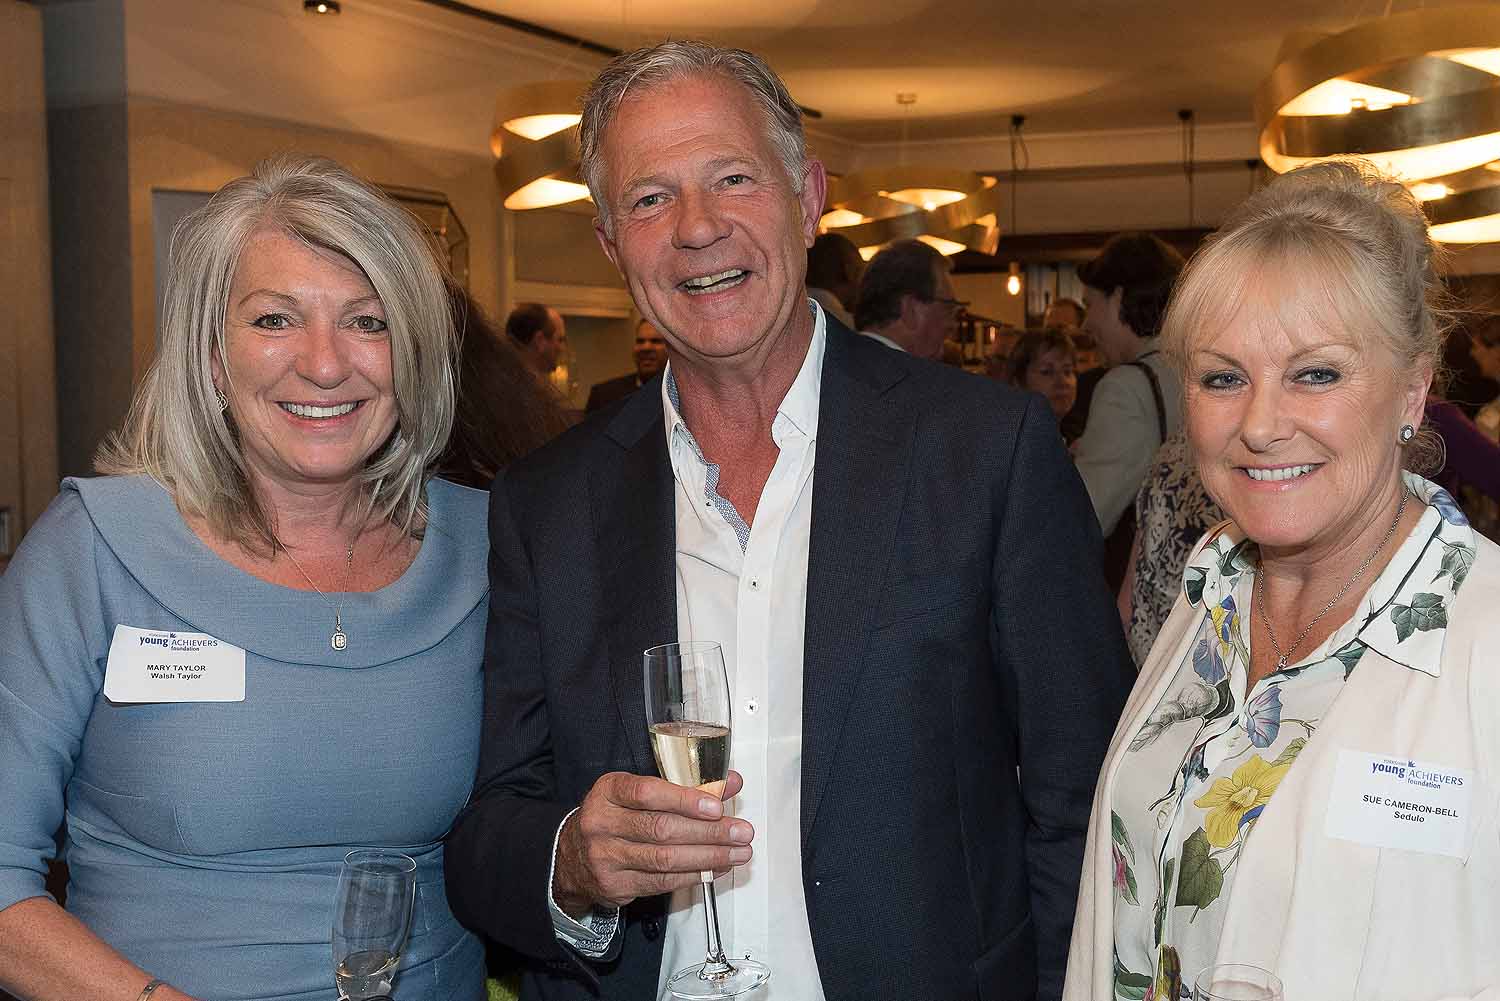 Mary Taylor, Jeremy Carter and Sue Cameron-Bell